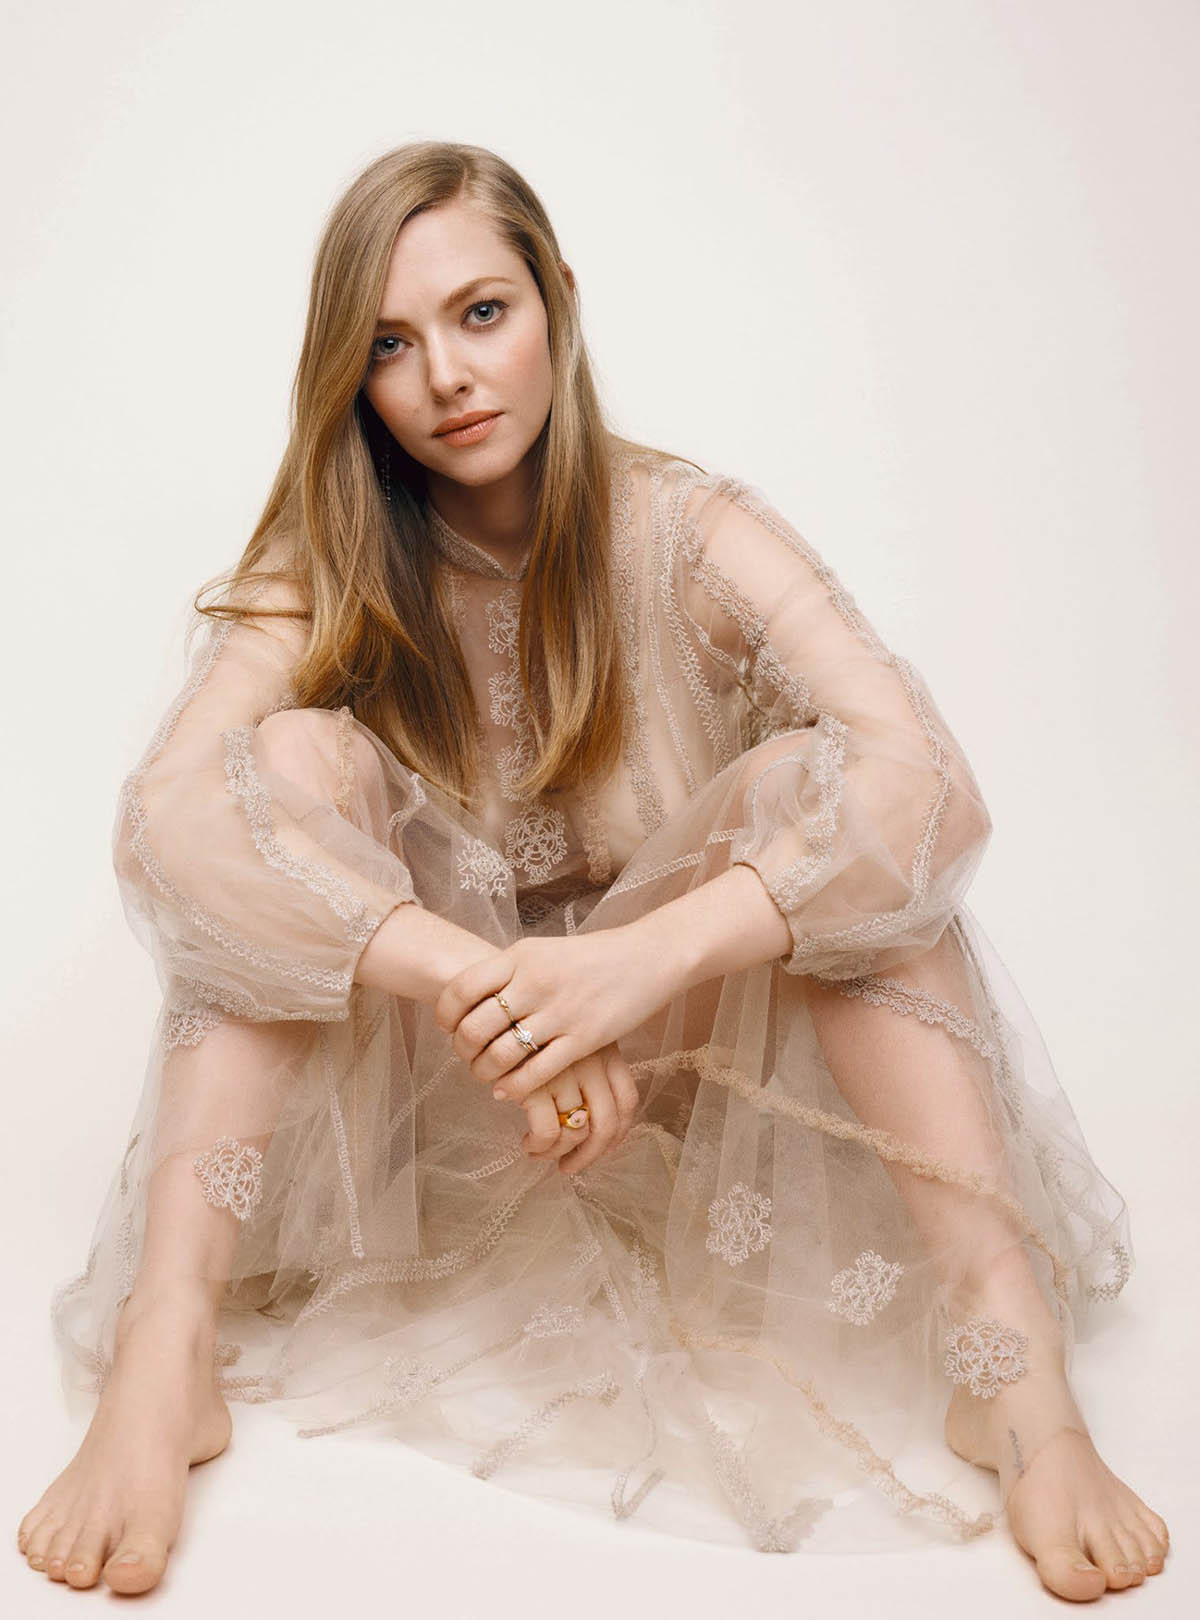 Amanda Seyfried covers The Sunday Times Style January 31st, 2021 by Bjorn Iooss